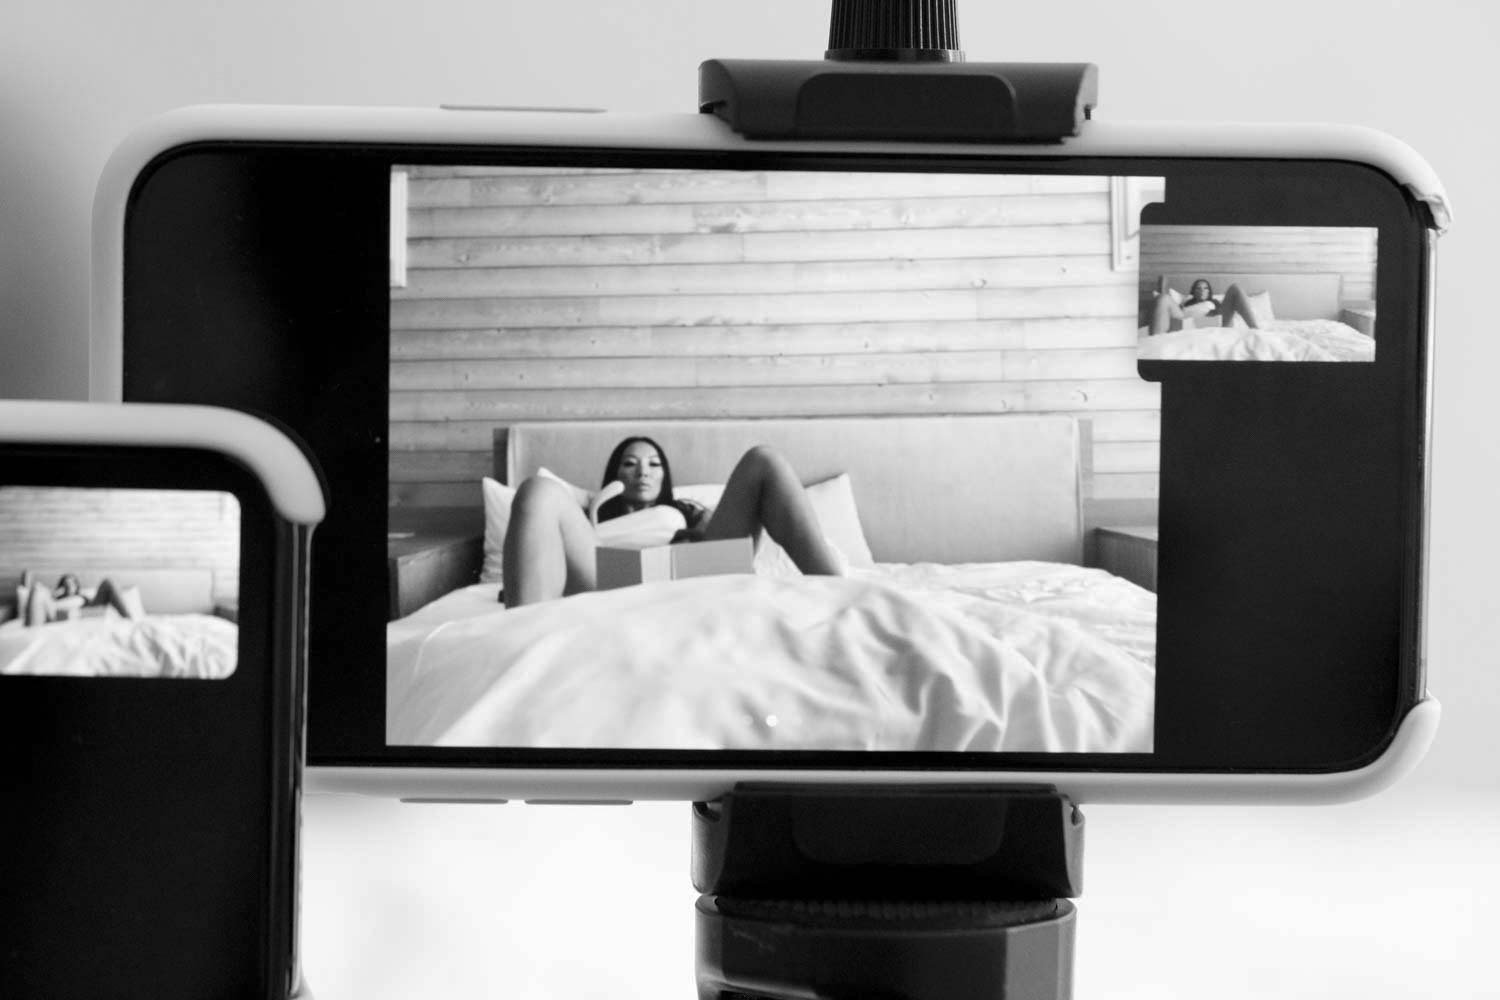 An iPhone sits on a tripod, filming a woman who lays with her legs open on a bed.